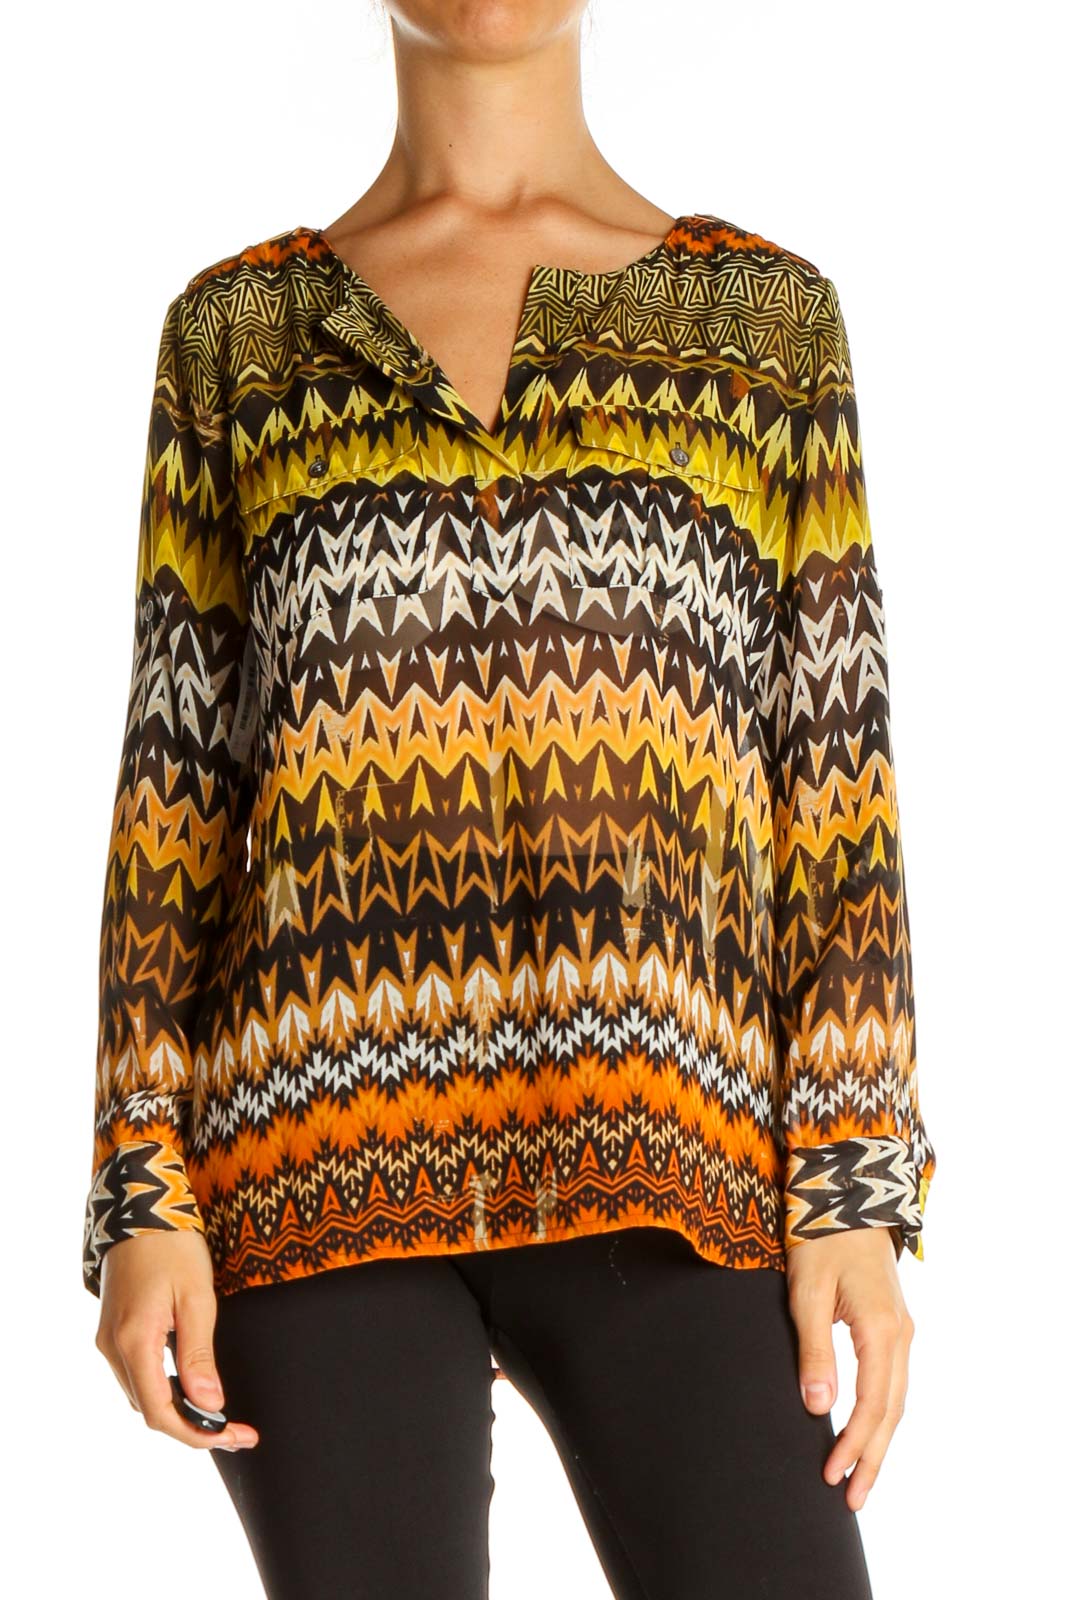 Brown Aztec Print All Day Wear Blouse Front